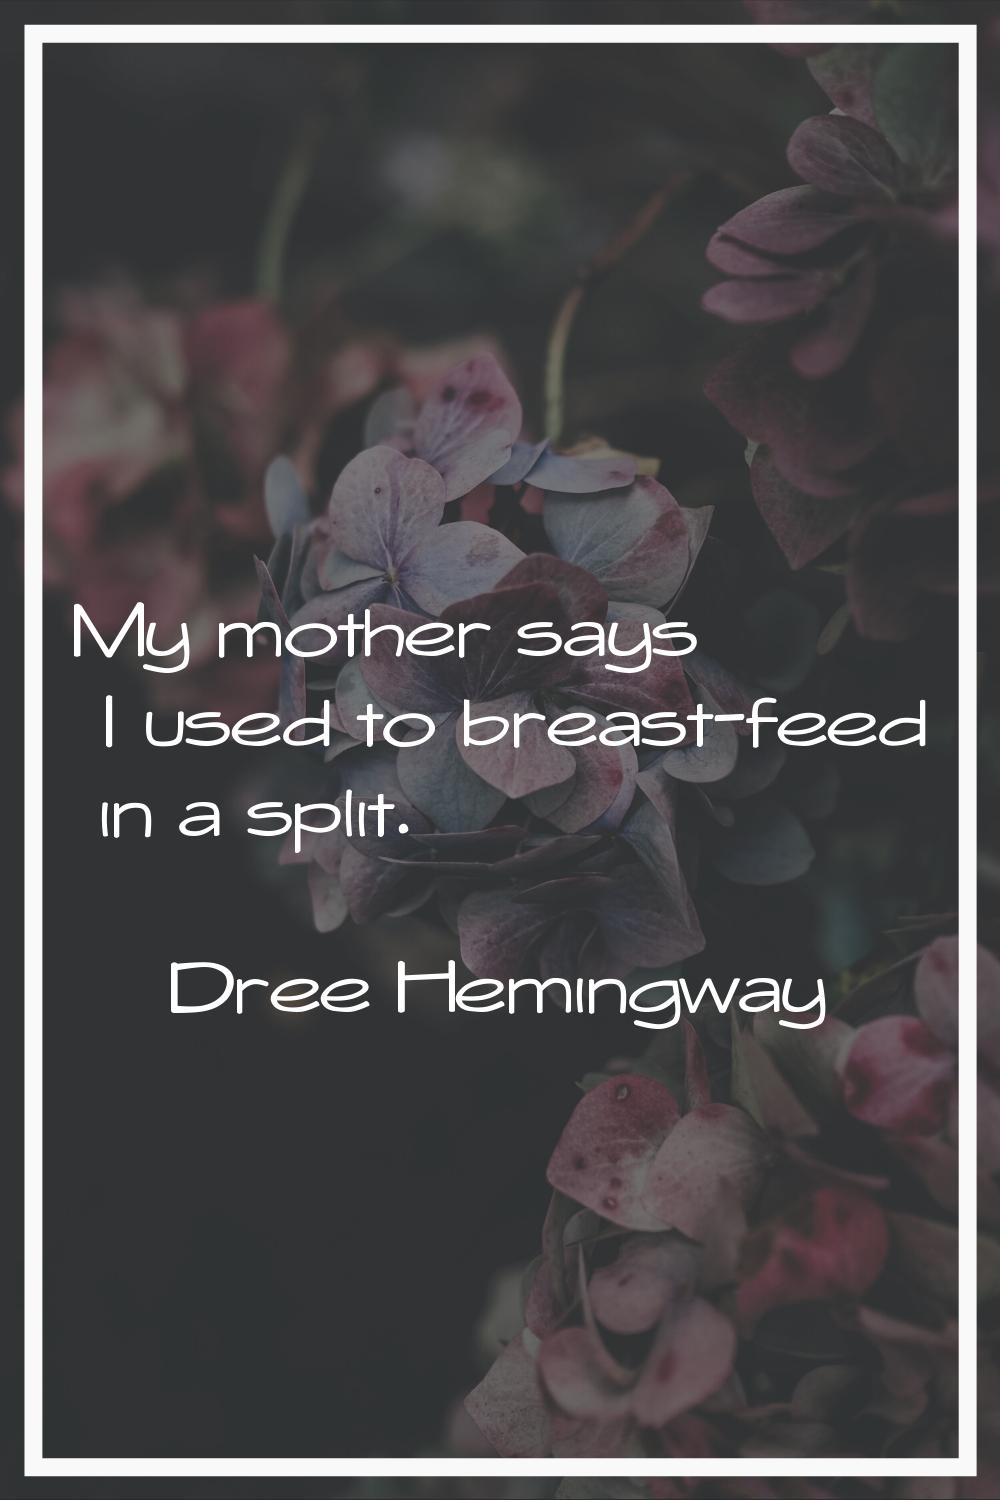 My mother says I used to breast-feed in a split.